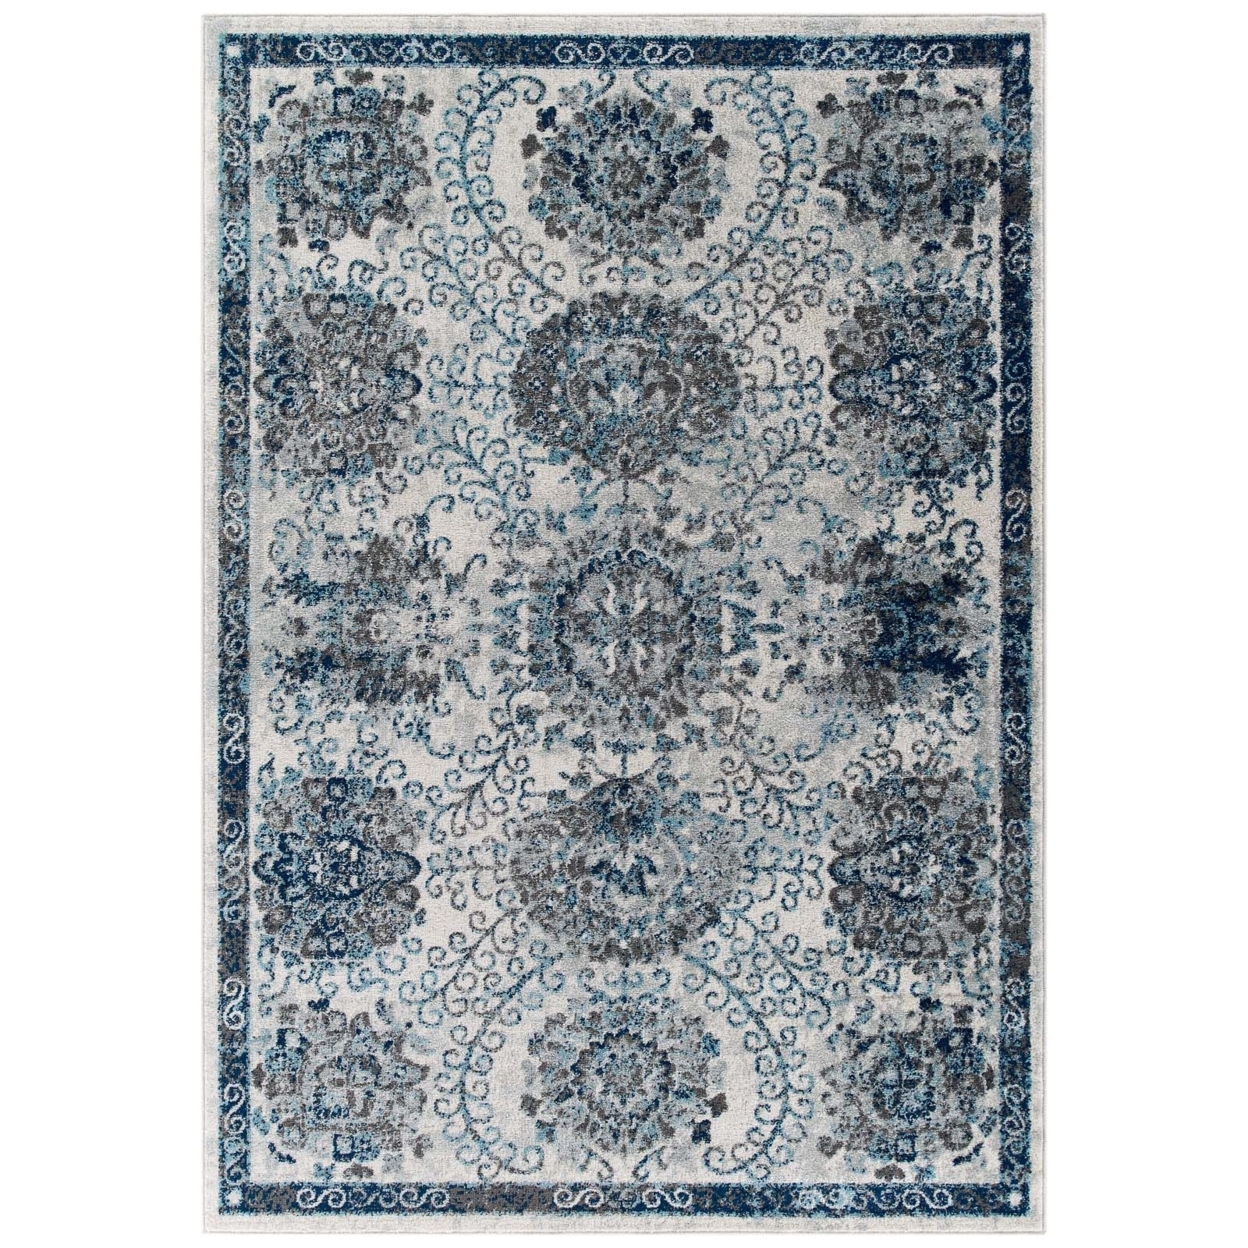 Entourage Kensie Distressed Floral Moroccan Trellis 5x8 Area Rug, Ivory And Blue